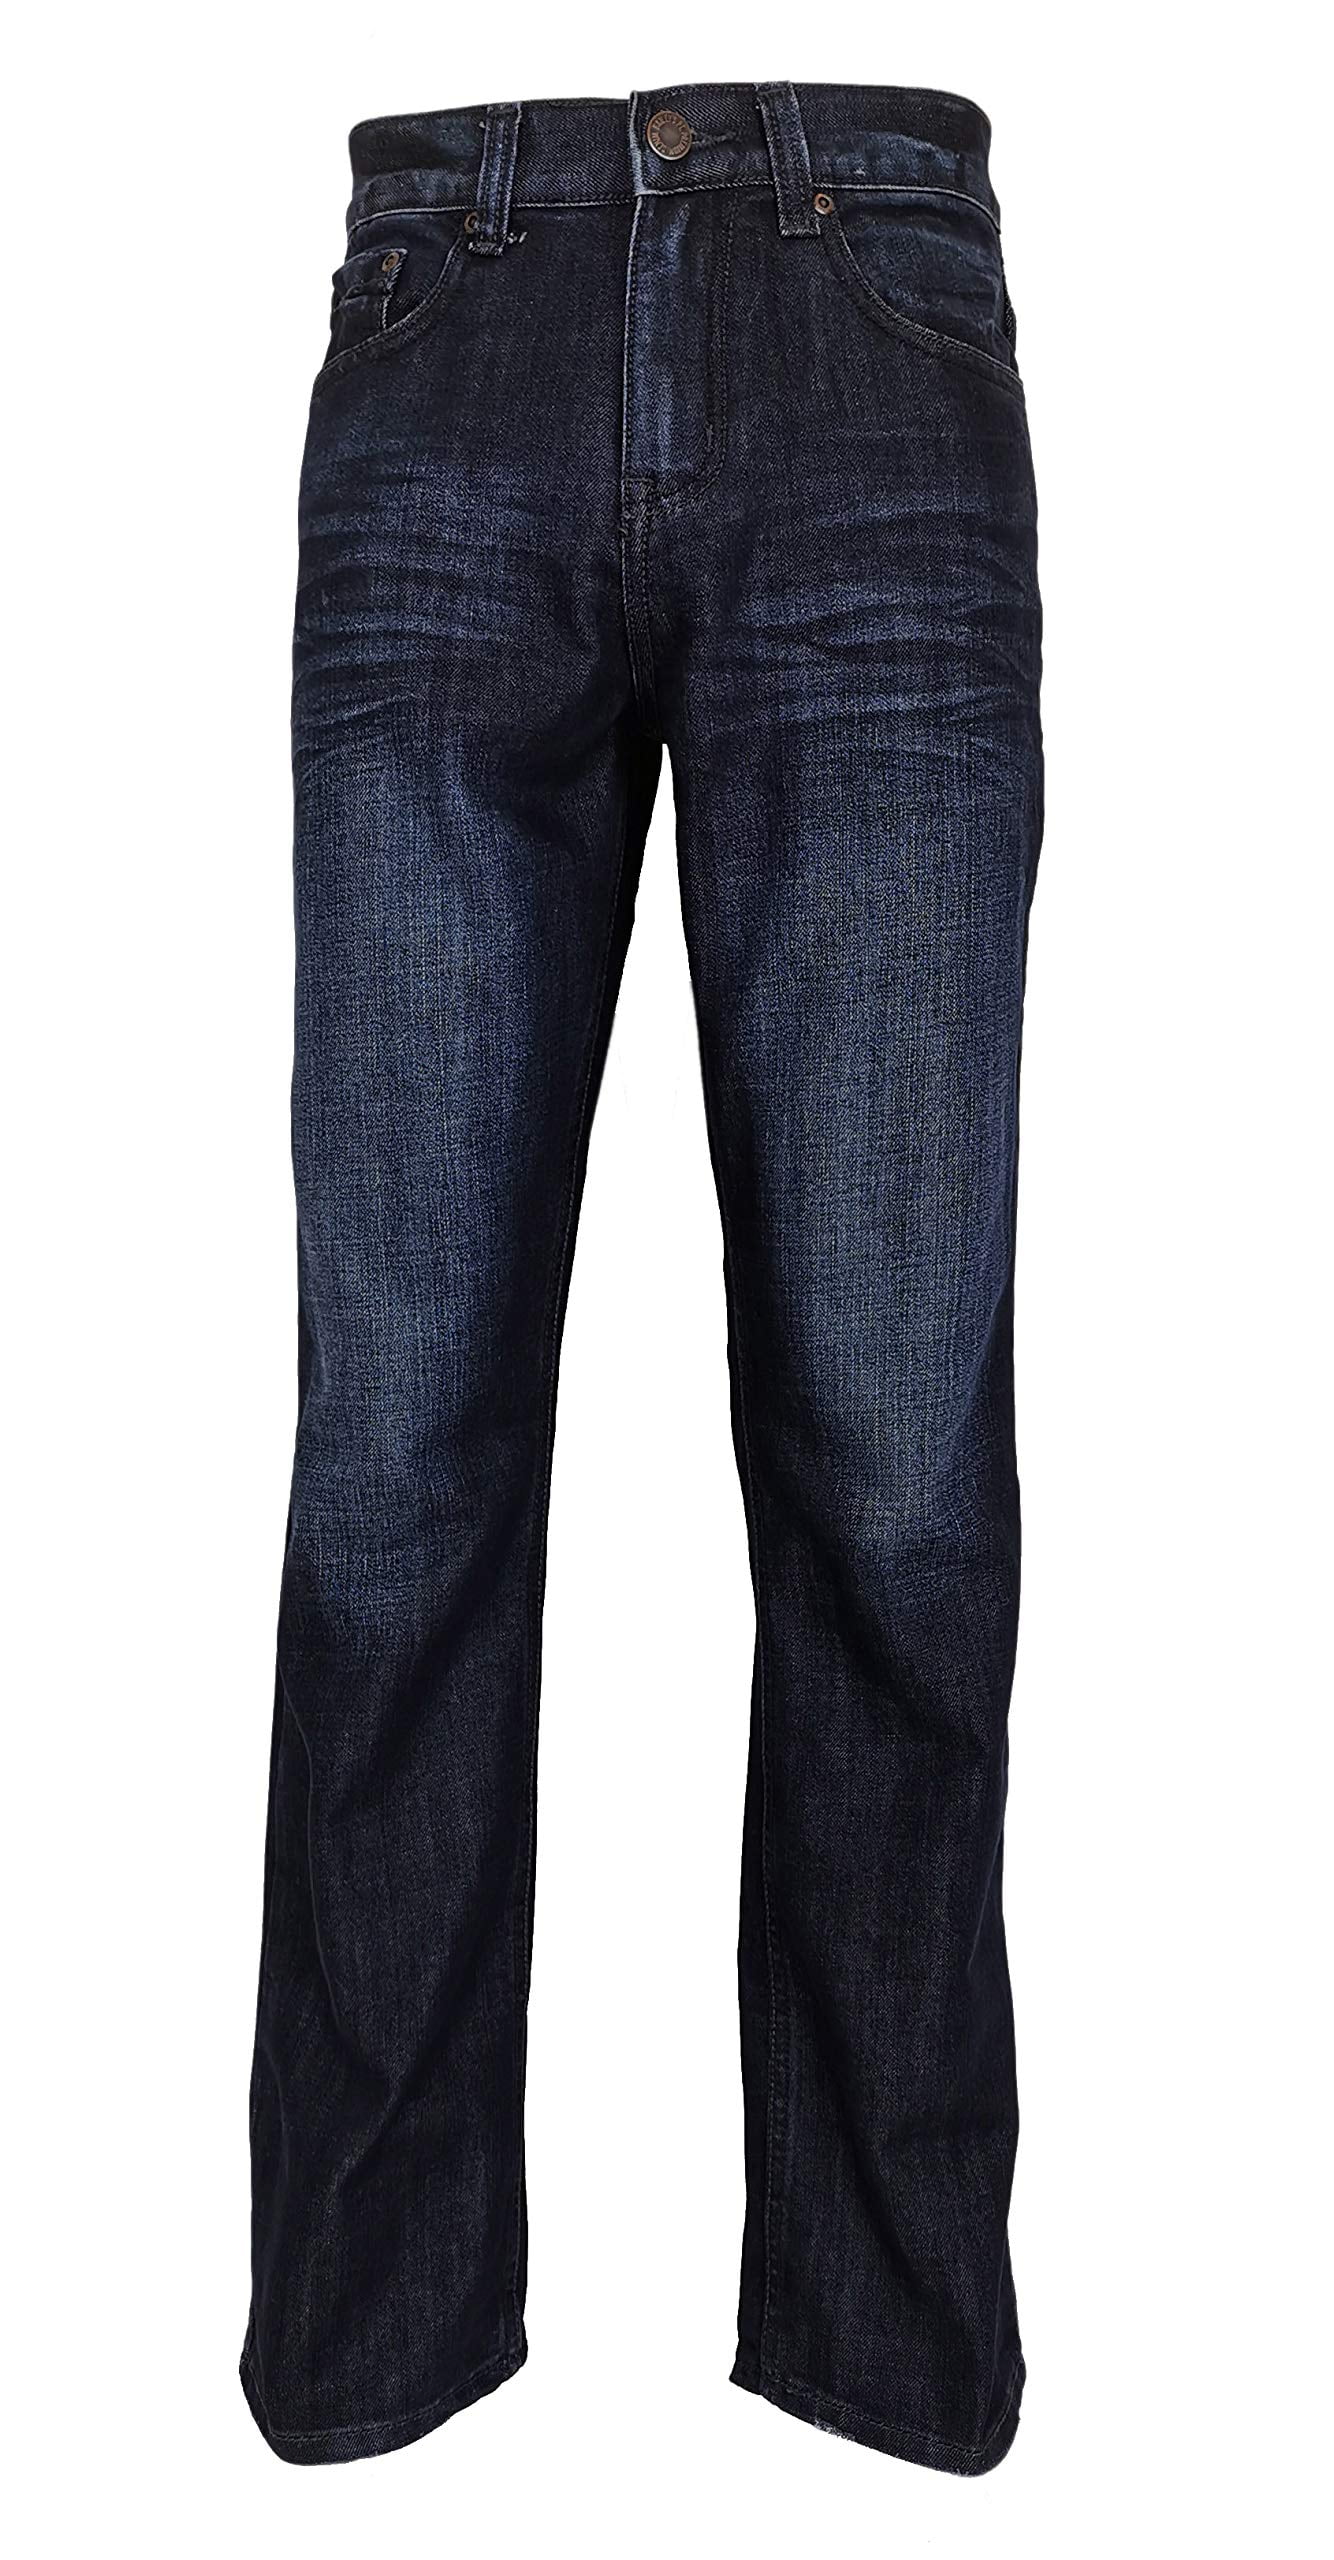 Bailey's Point Men's Fashion Relaxed Bootcut Jeans Dark Wash Size 28X30 ...